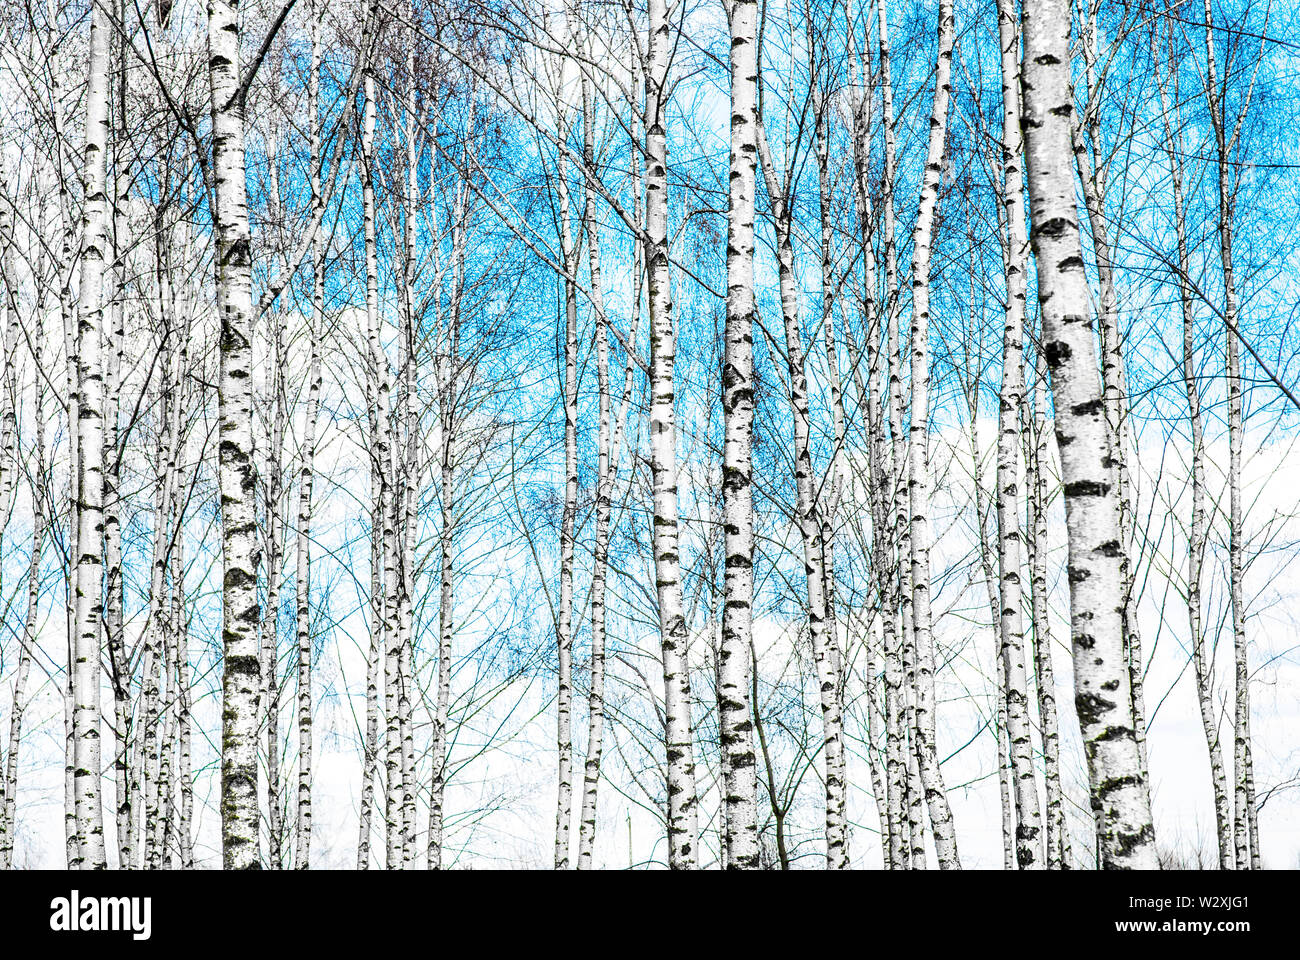 Blue sky with white clouds over summer black and white birch tree trunks. Stock Photo